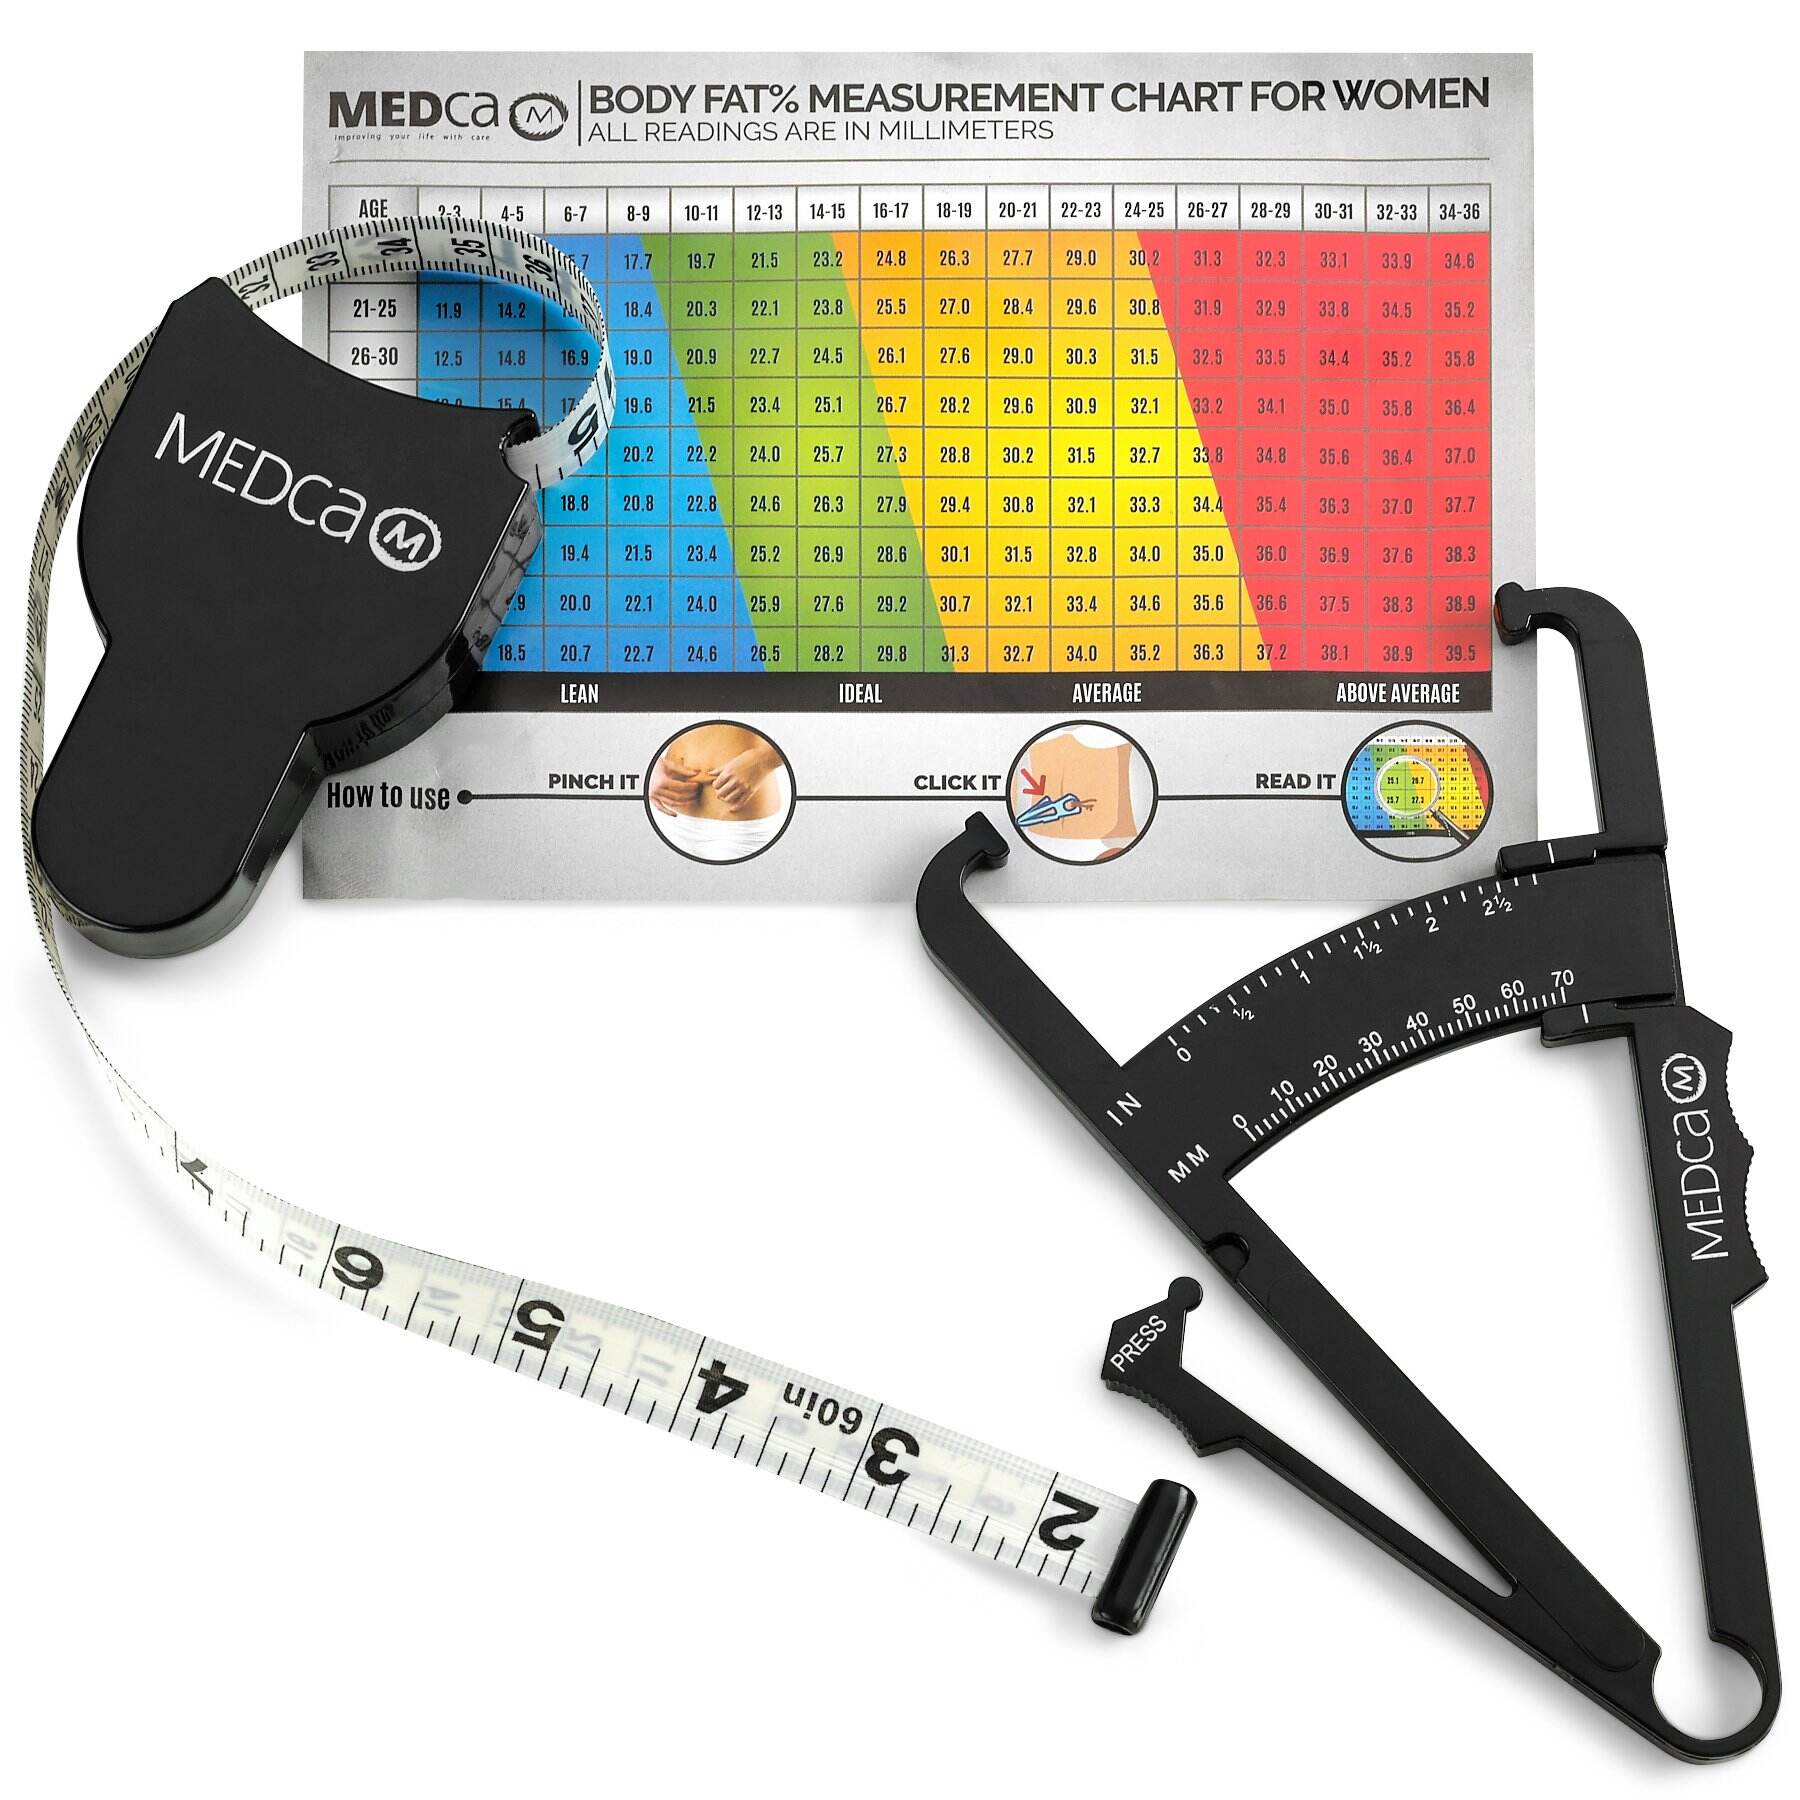 Where To Purchase Body Fat Calipers